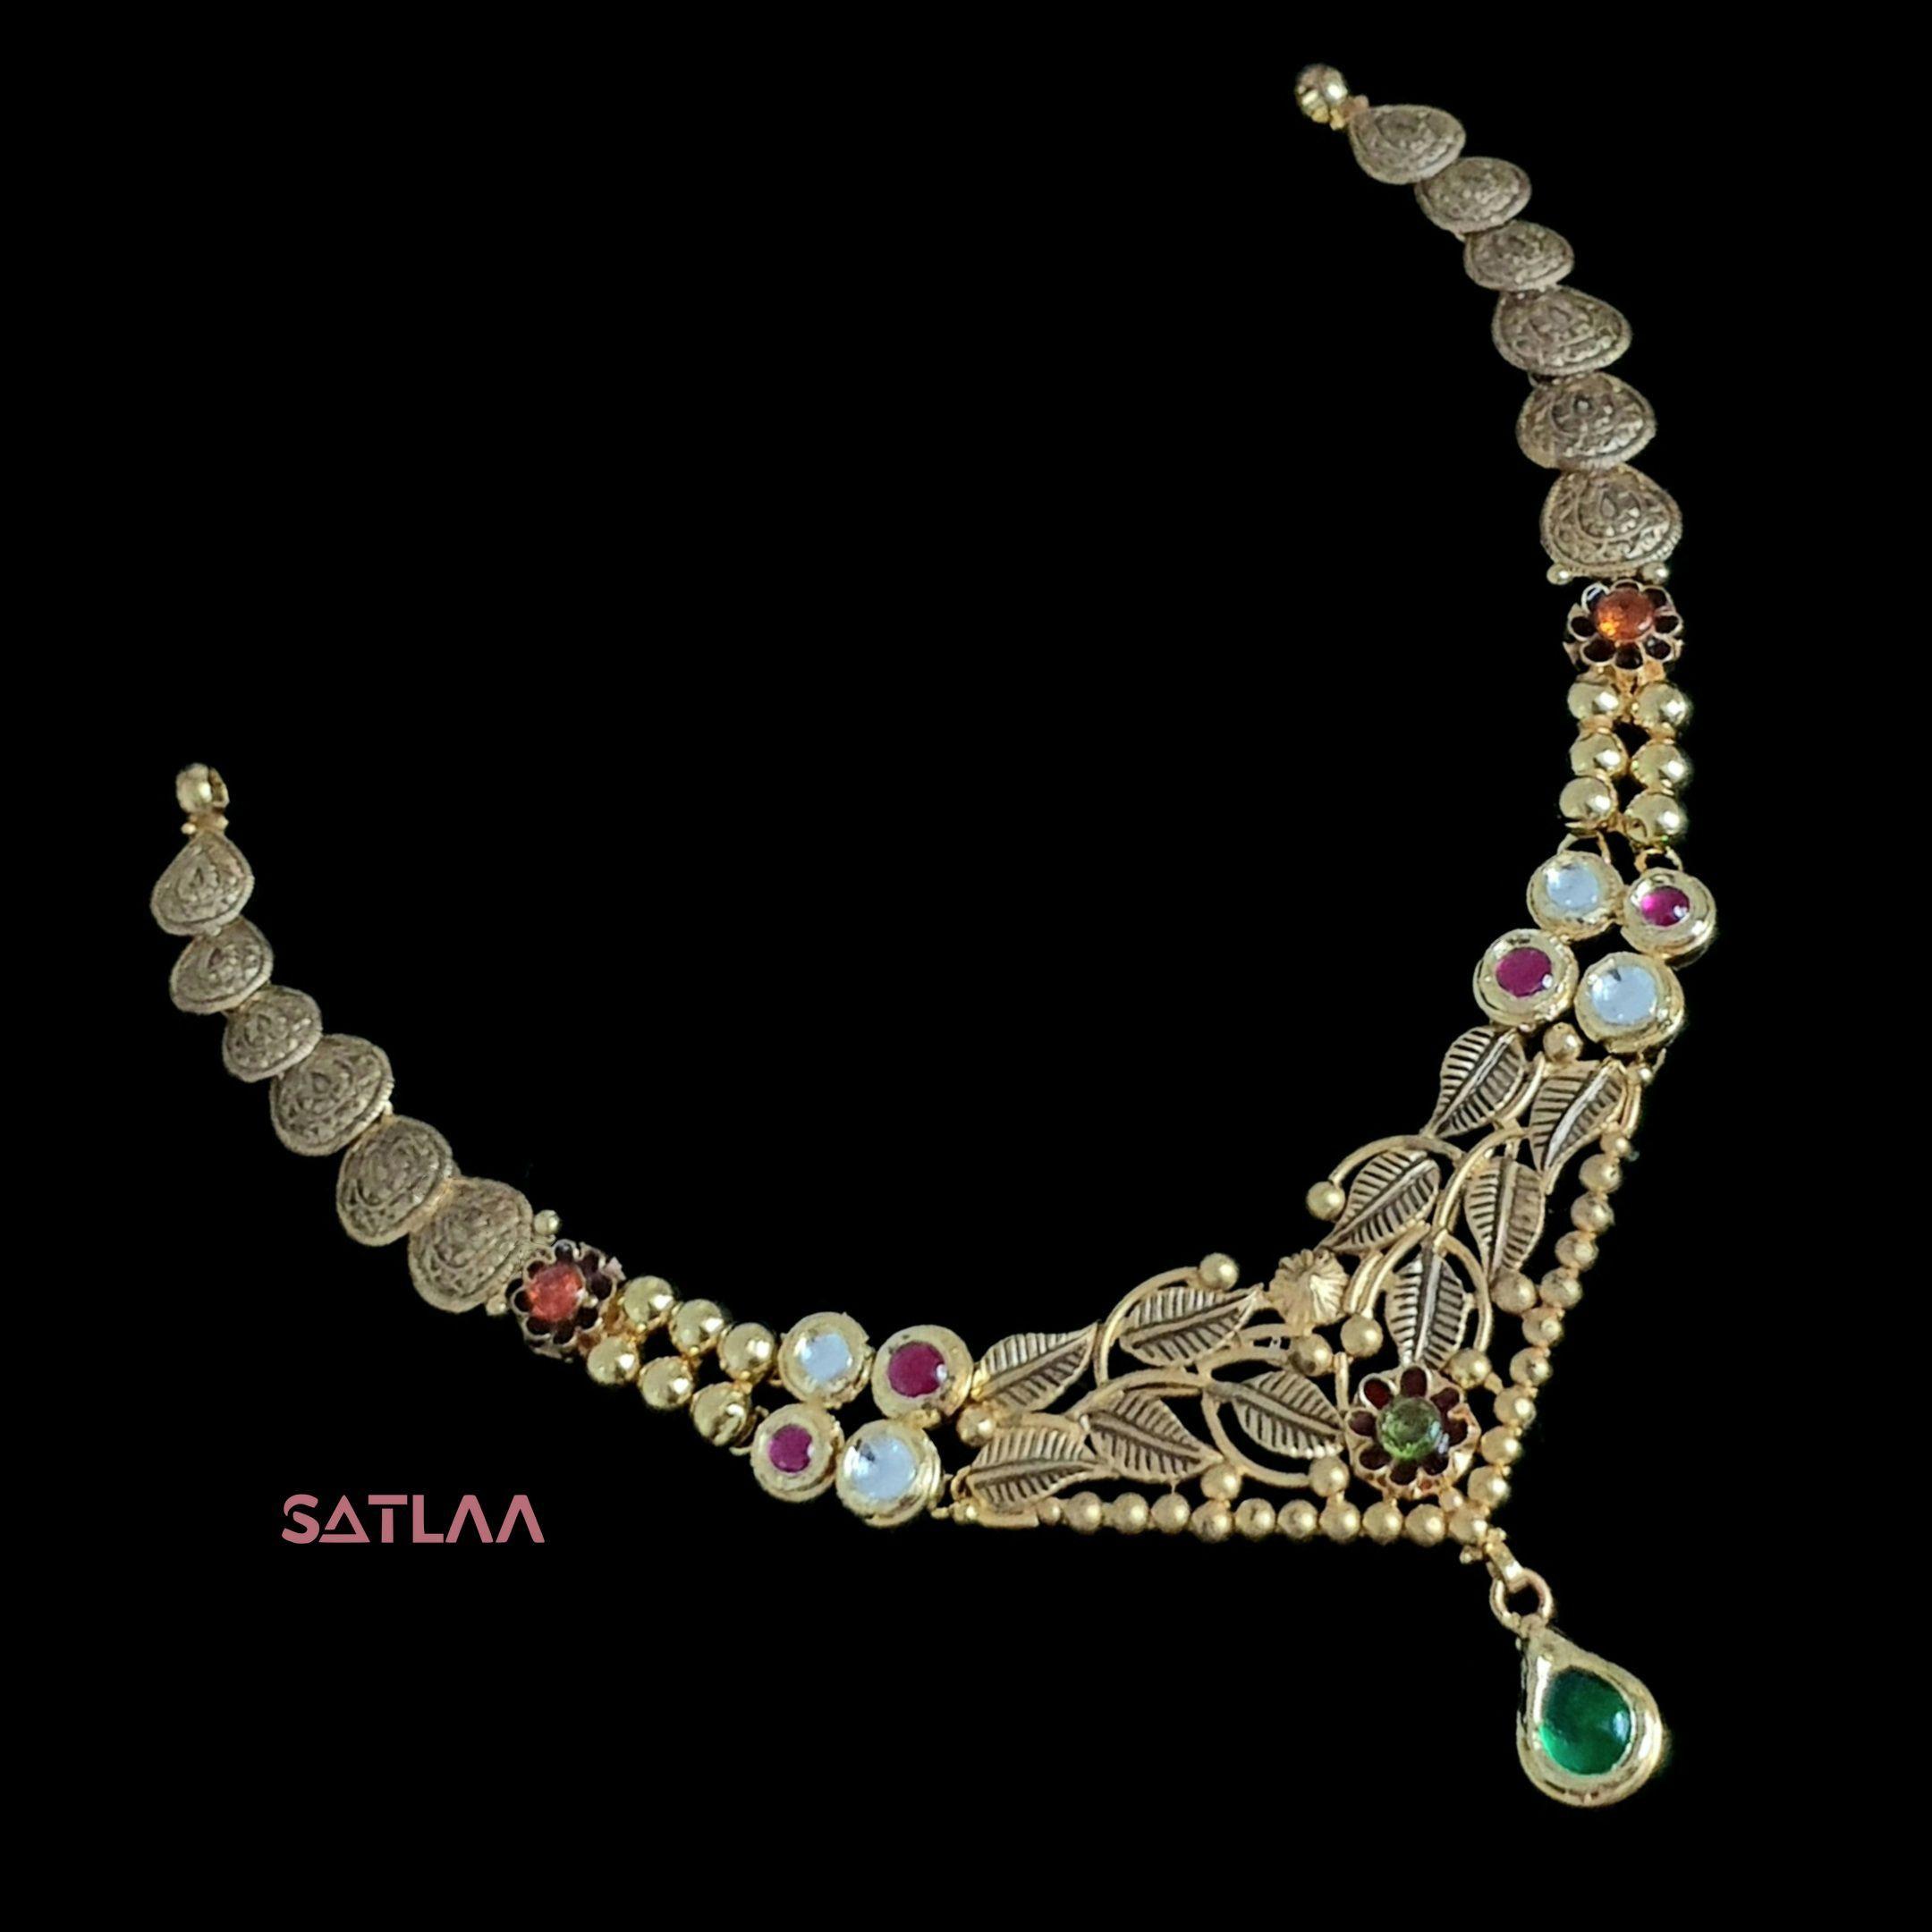 New and Latest Design of Satlaa Desi Indian Rajasthani Gold Necklace 